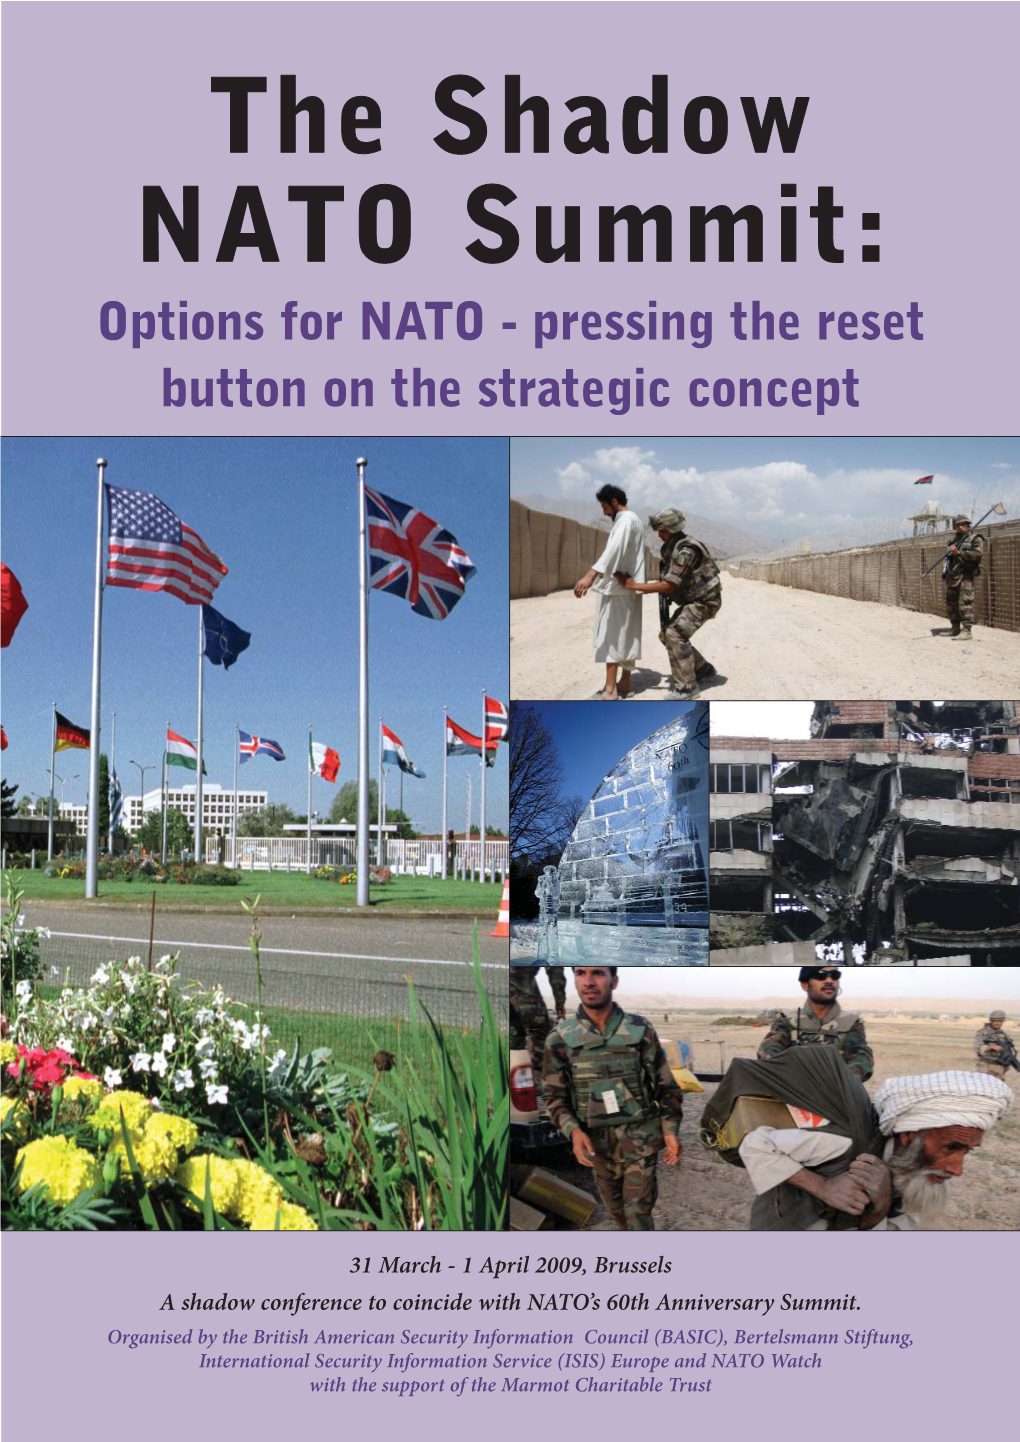 The Shadow NATO Summit: Options for NATO - Pressing the Reset Button on the Strategic Concept